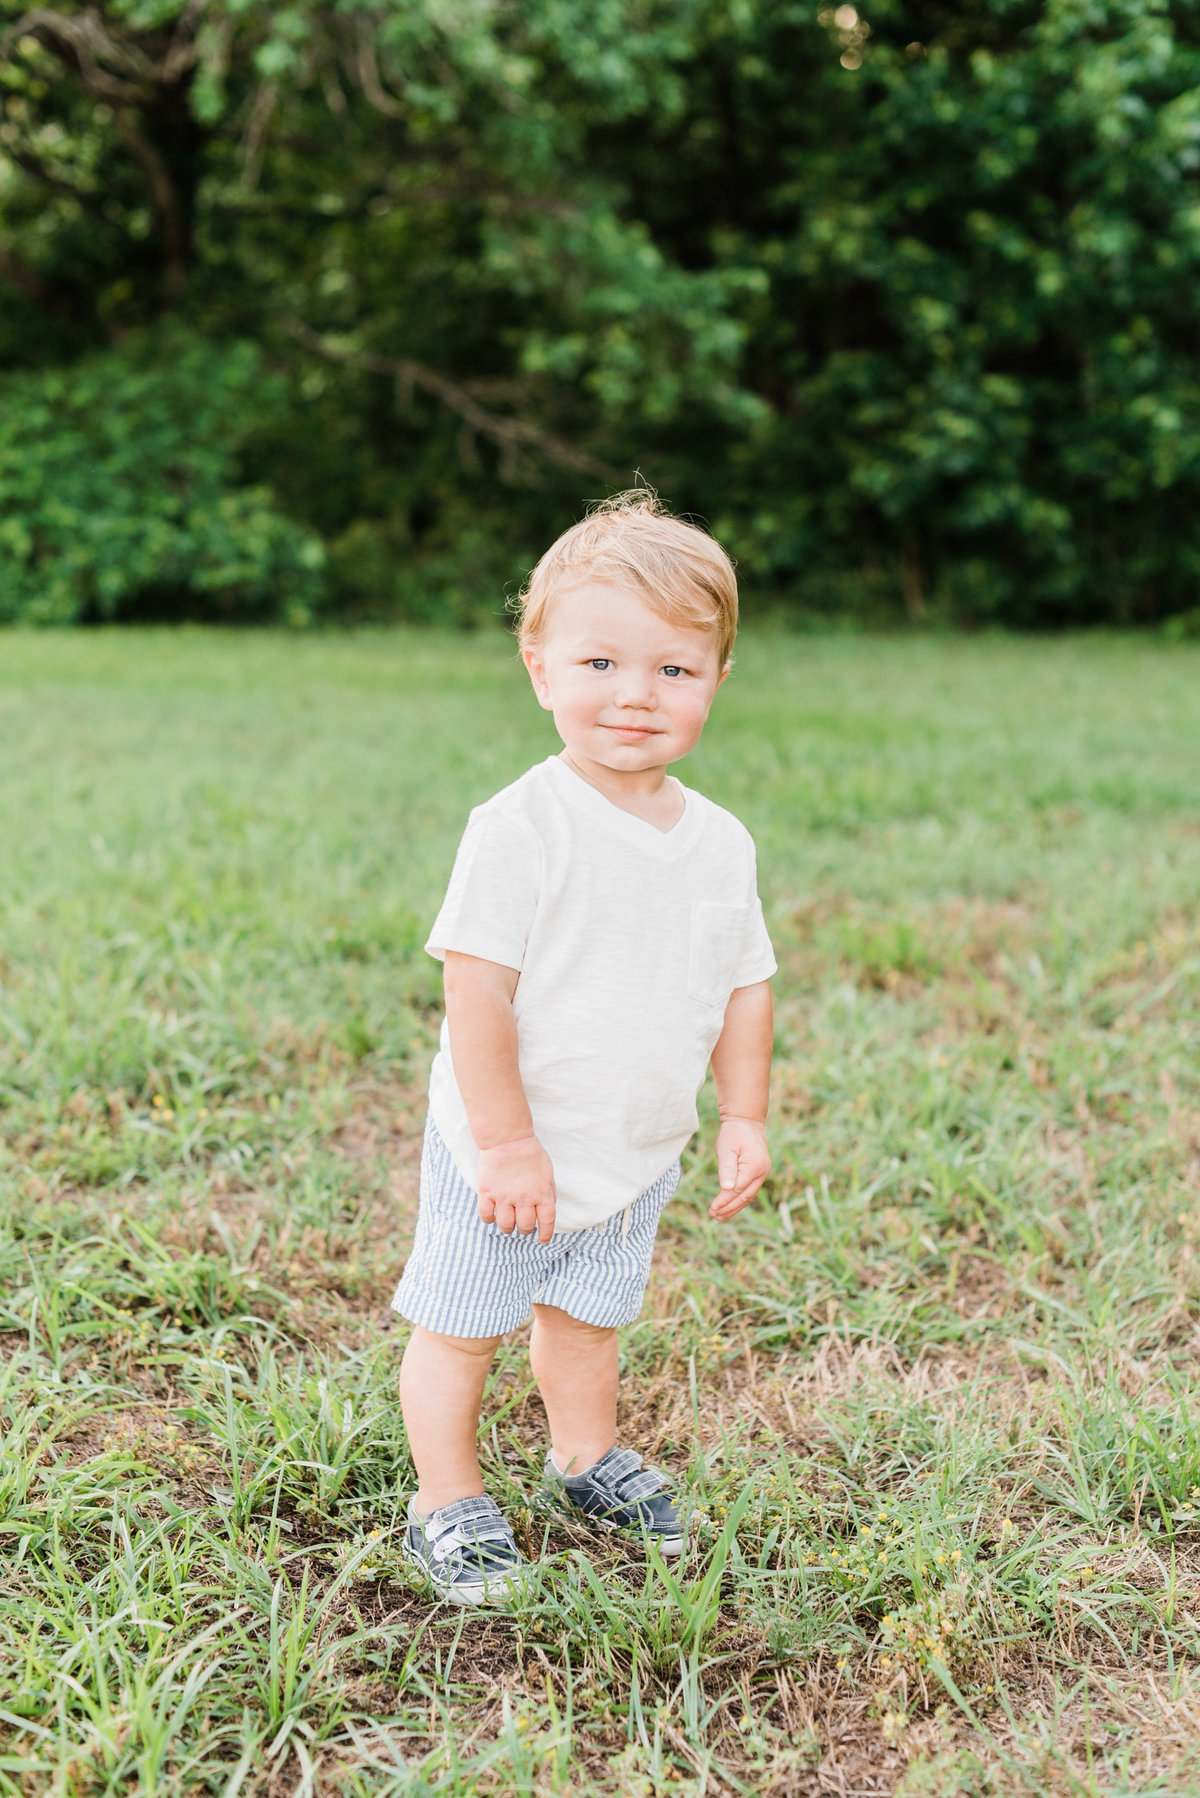 Toddler in white shirt and blue shorts pauses for a photo during a family session in Raleigh NC. Photographed by Raleigh NC family photographer A.J. Dunlap Photography.